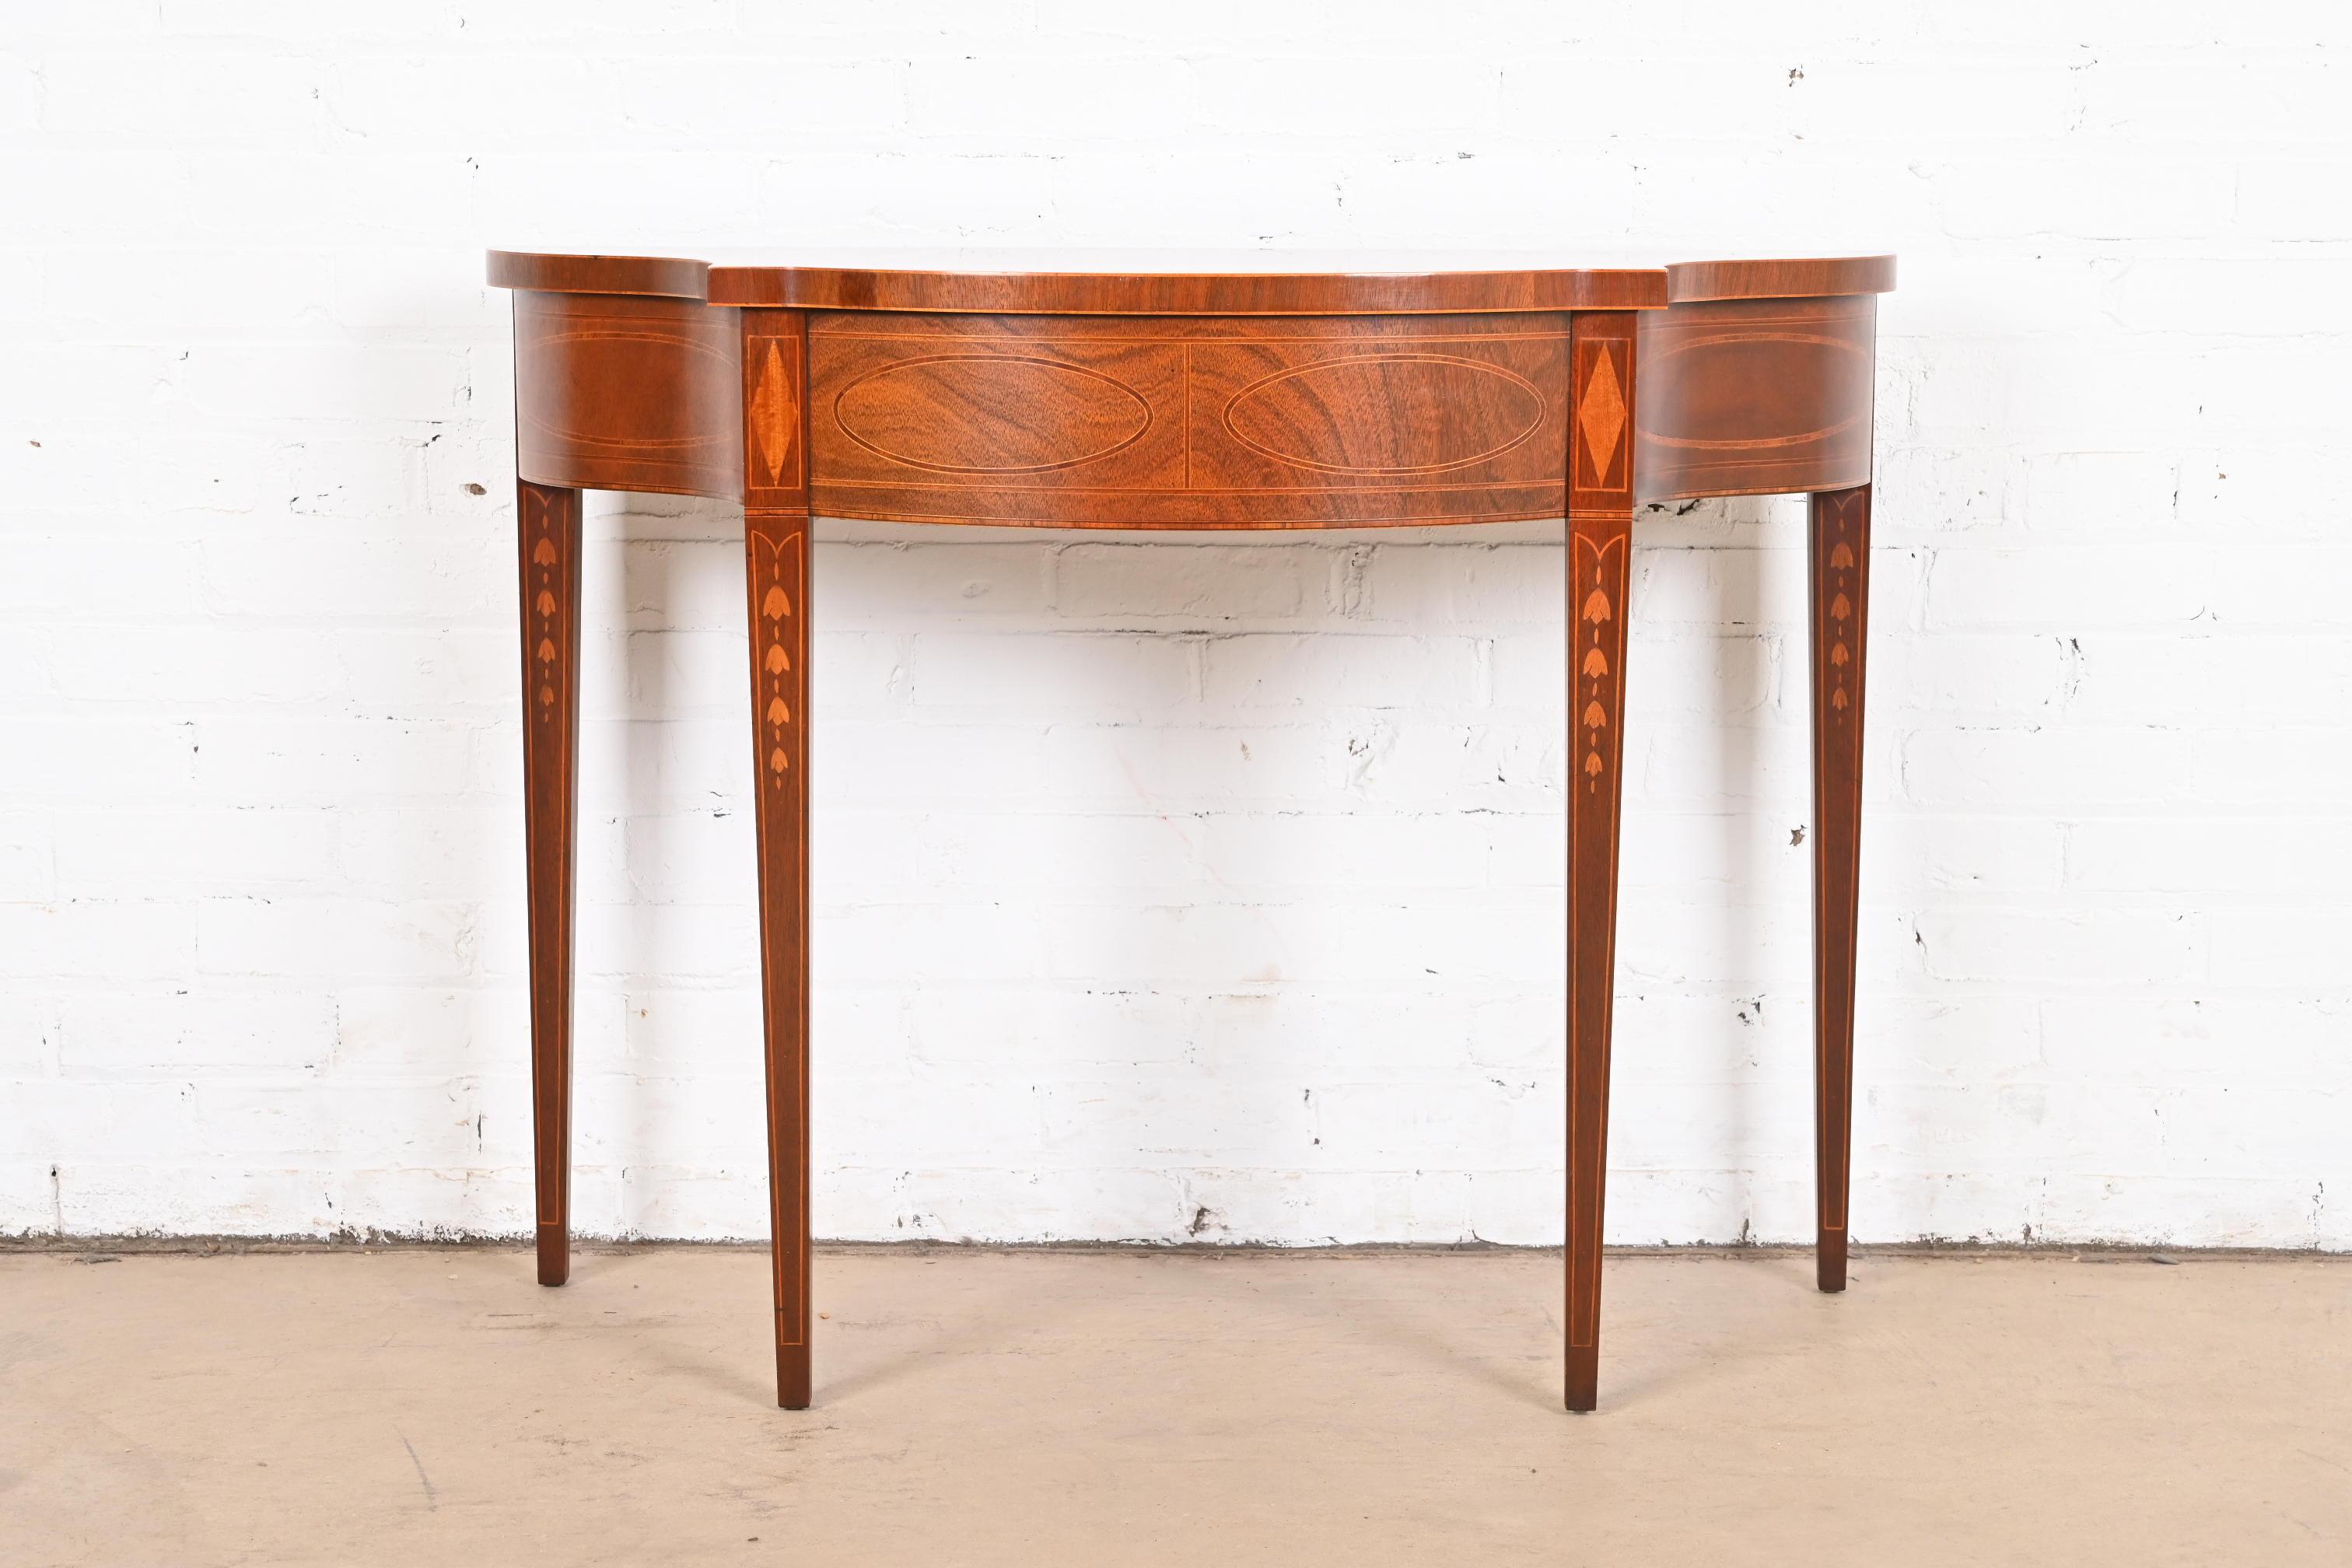 American Baker Furniture Historic Charleston Federal Inlaid Mahogany Console Table For Sale